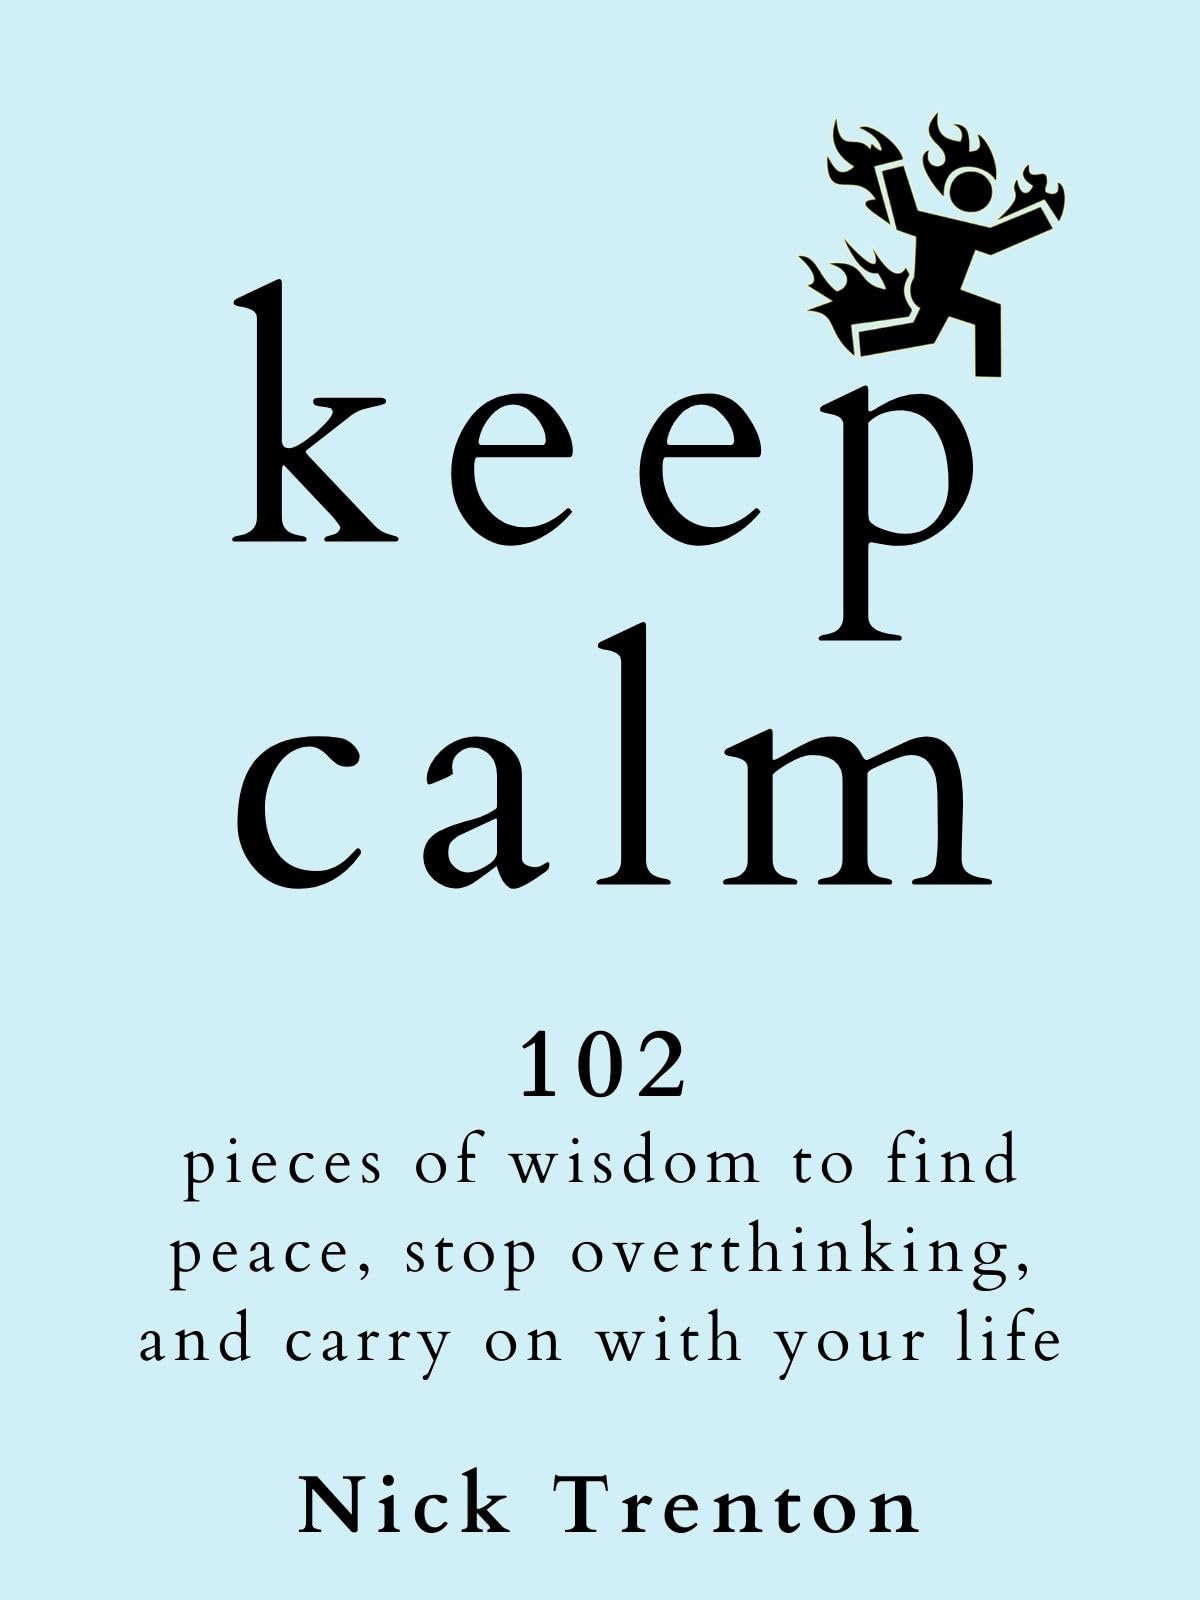 KEEP CALM: 102 Pieces of Wisdom to Find Peace, Stop Overthinking, and Carry On With Your Life (The Path to Calm Book 18)